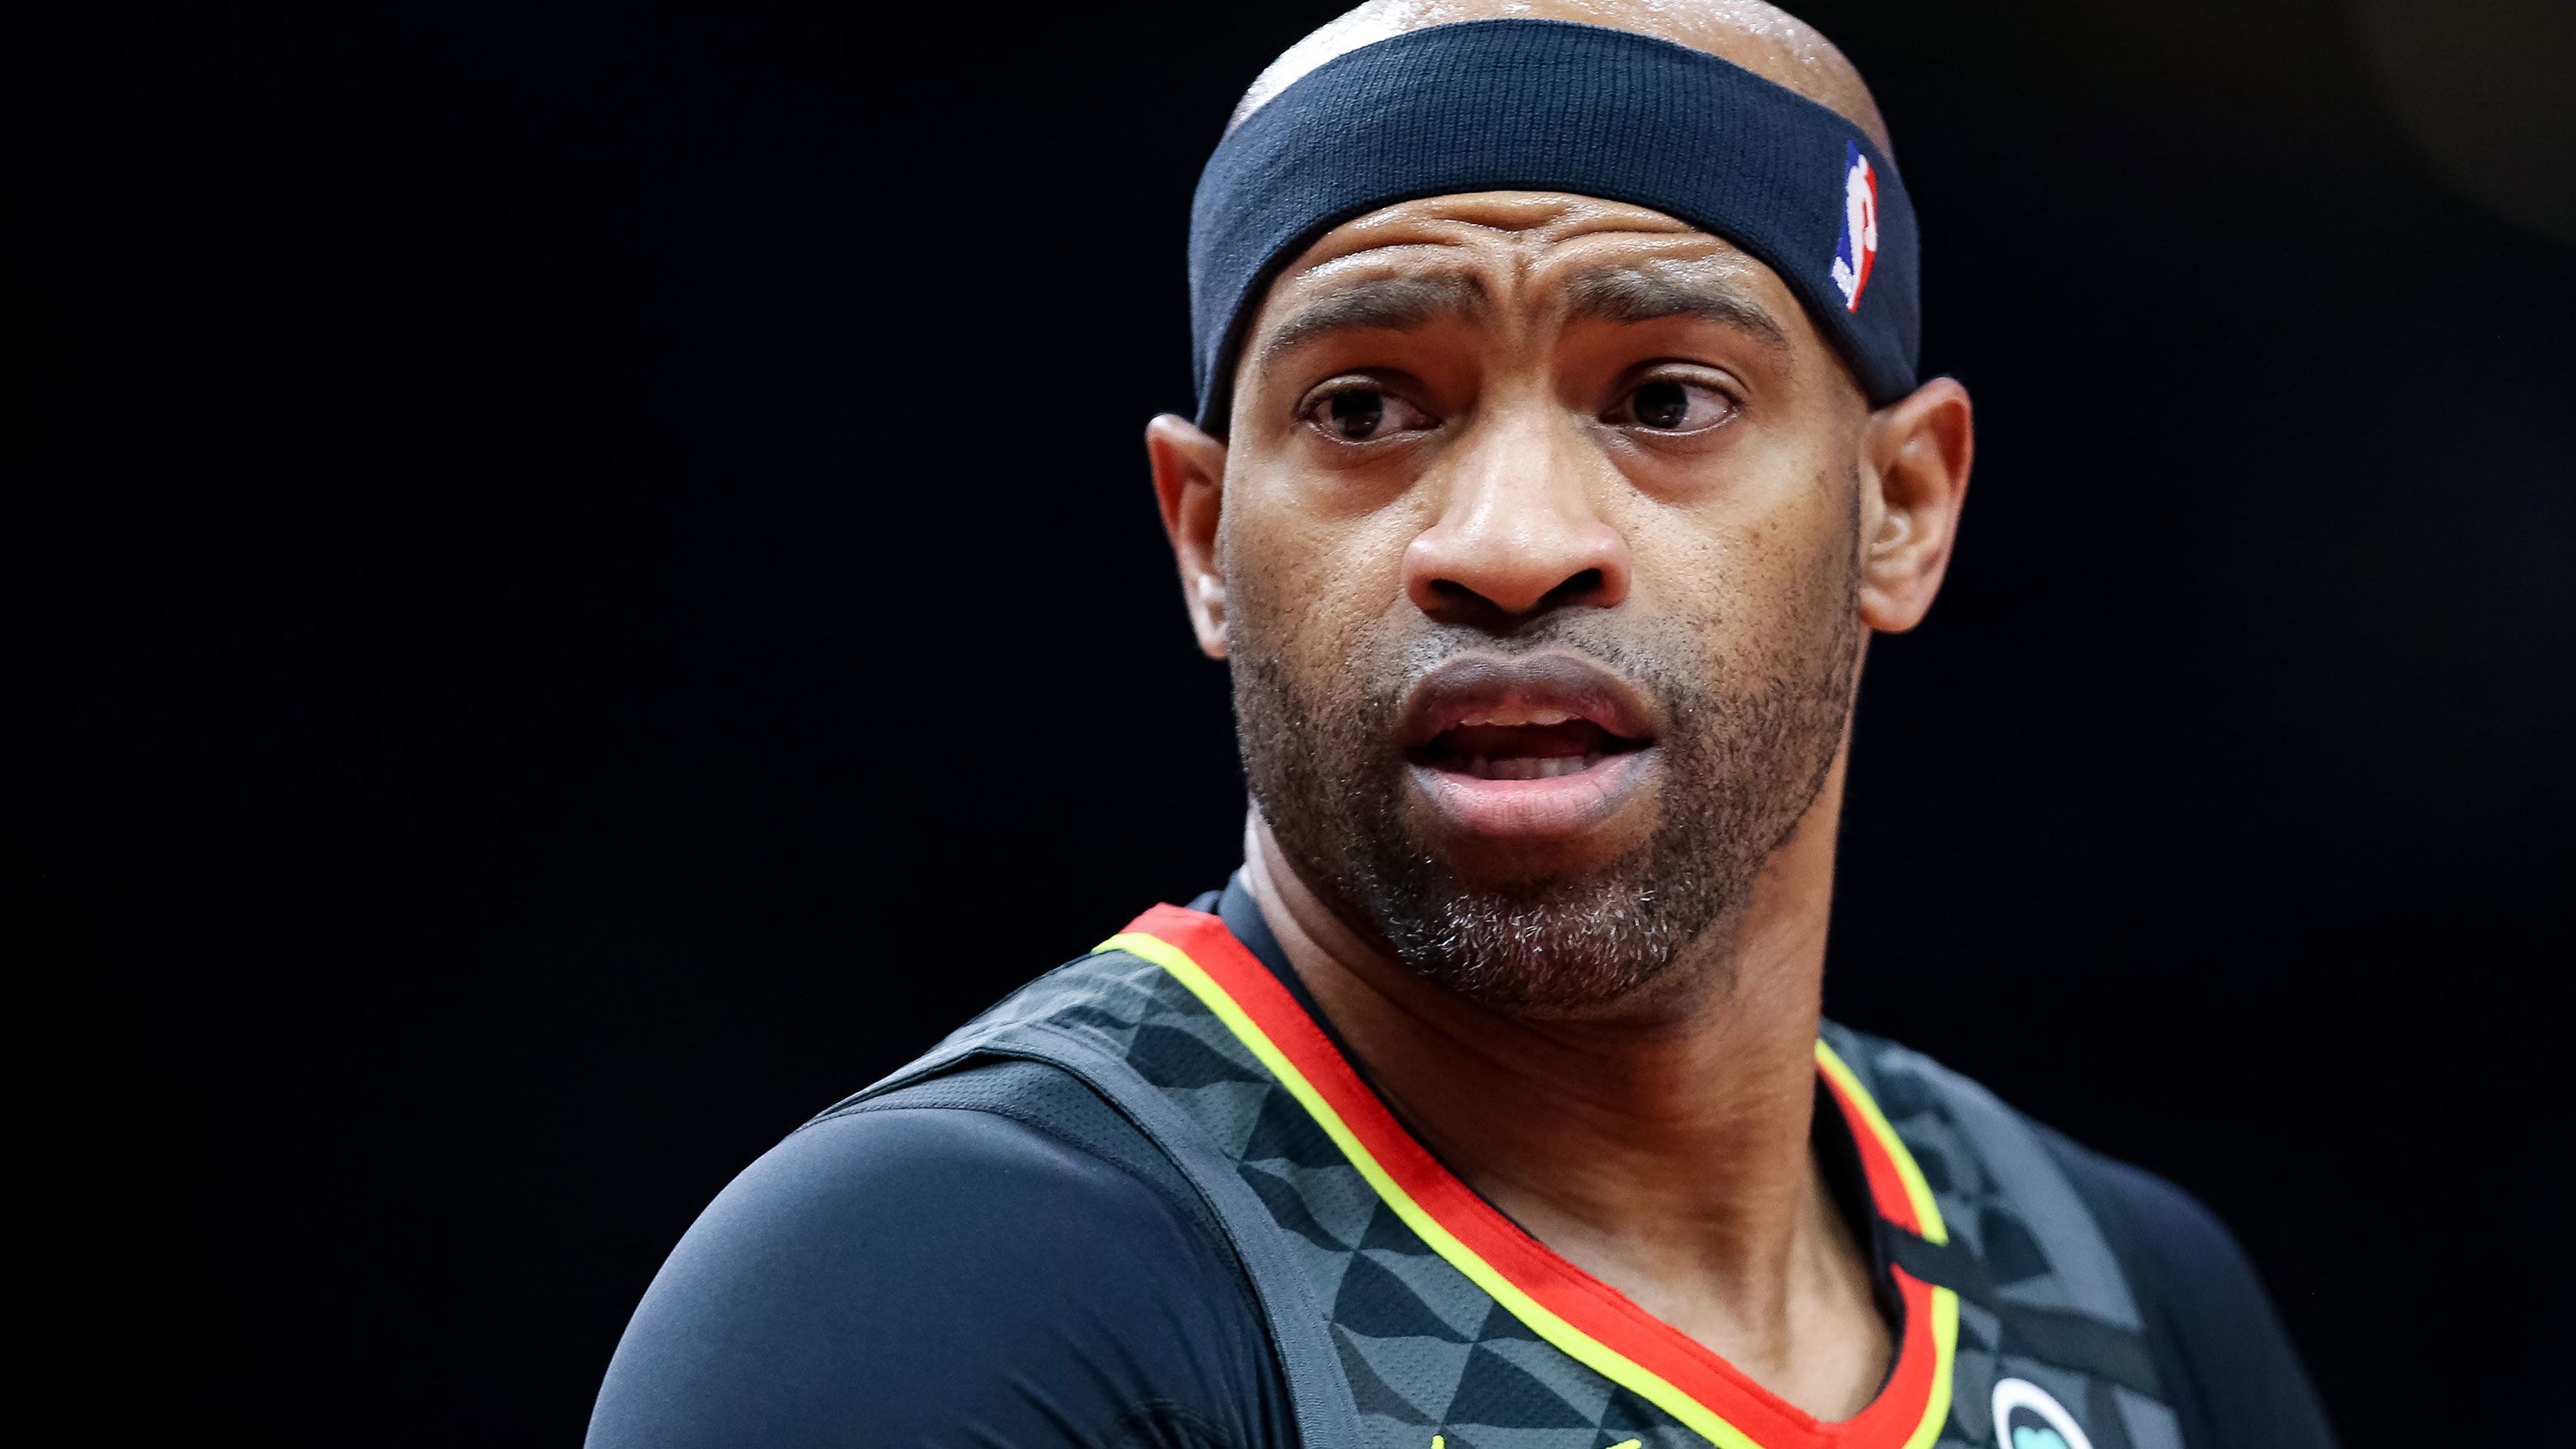 ESPN on X: Vince Carter is the last starter from the 2001 NBA All-Star  game to retire. These lineups produced: ∙ 91 All-Star game selections ∙ 12  NBA championships ∙ 6 Hall